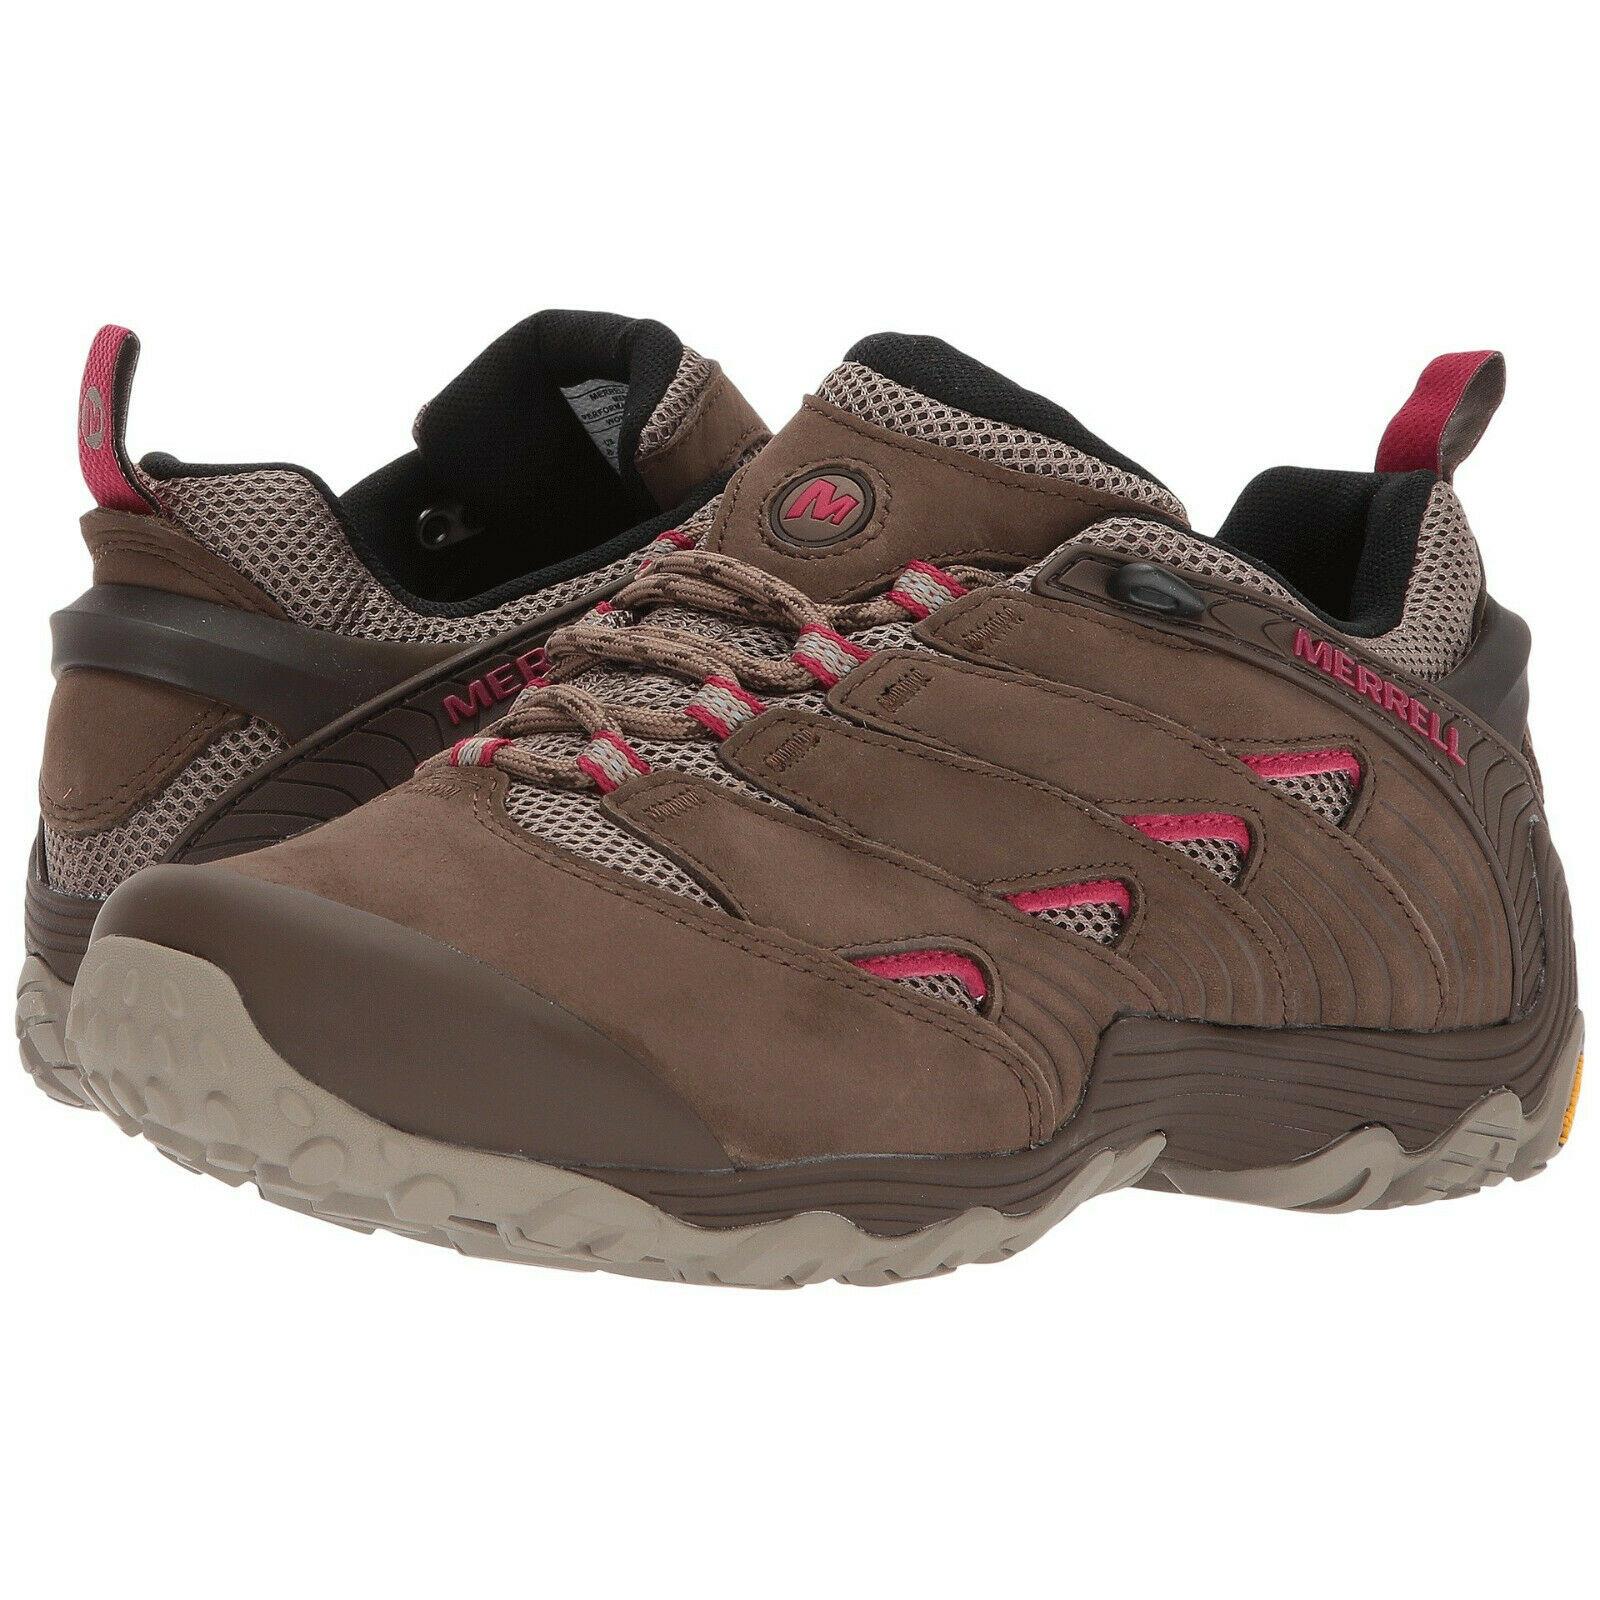 Merrell Womens Chameleon 7 Lace Up Hook Hiking Trail Walking Athletic Shoes